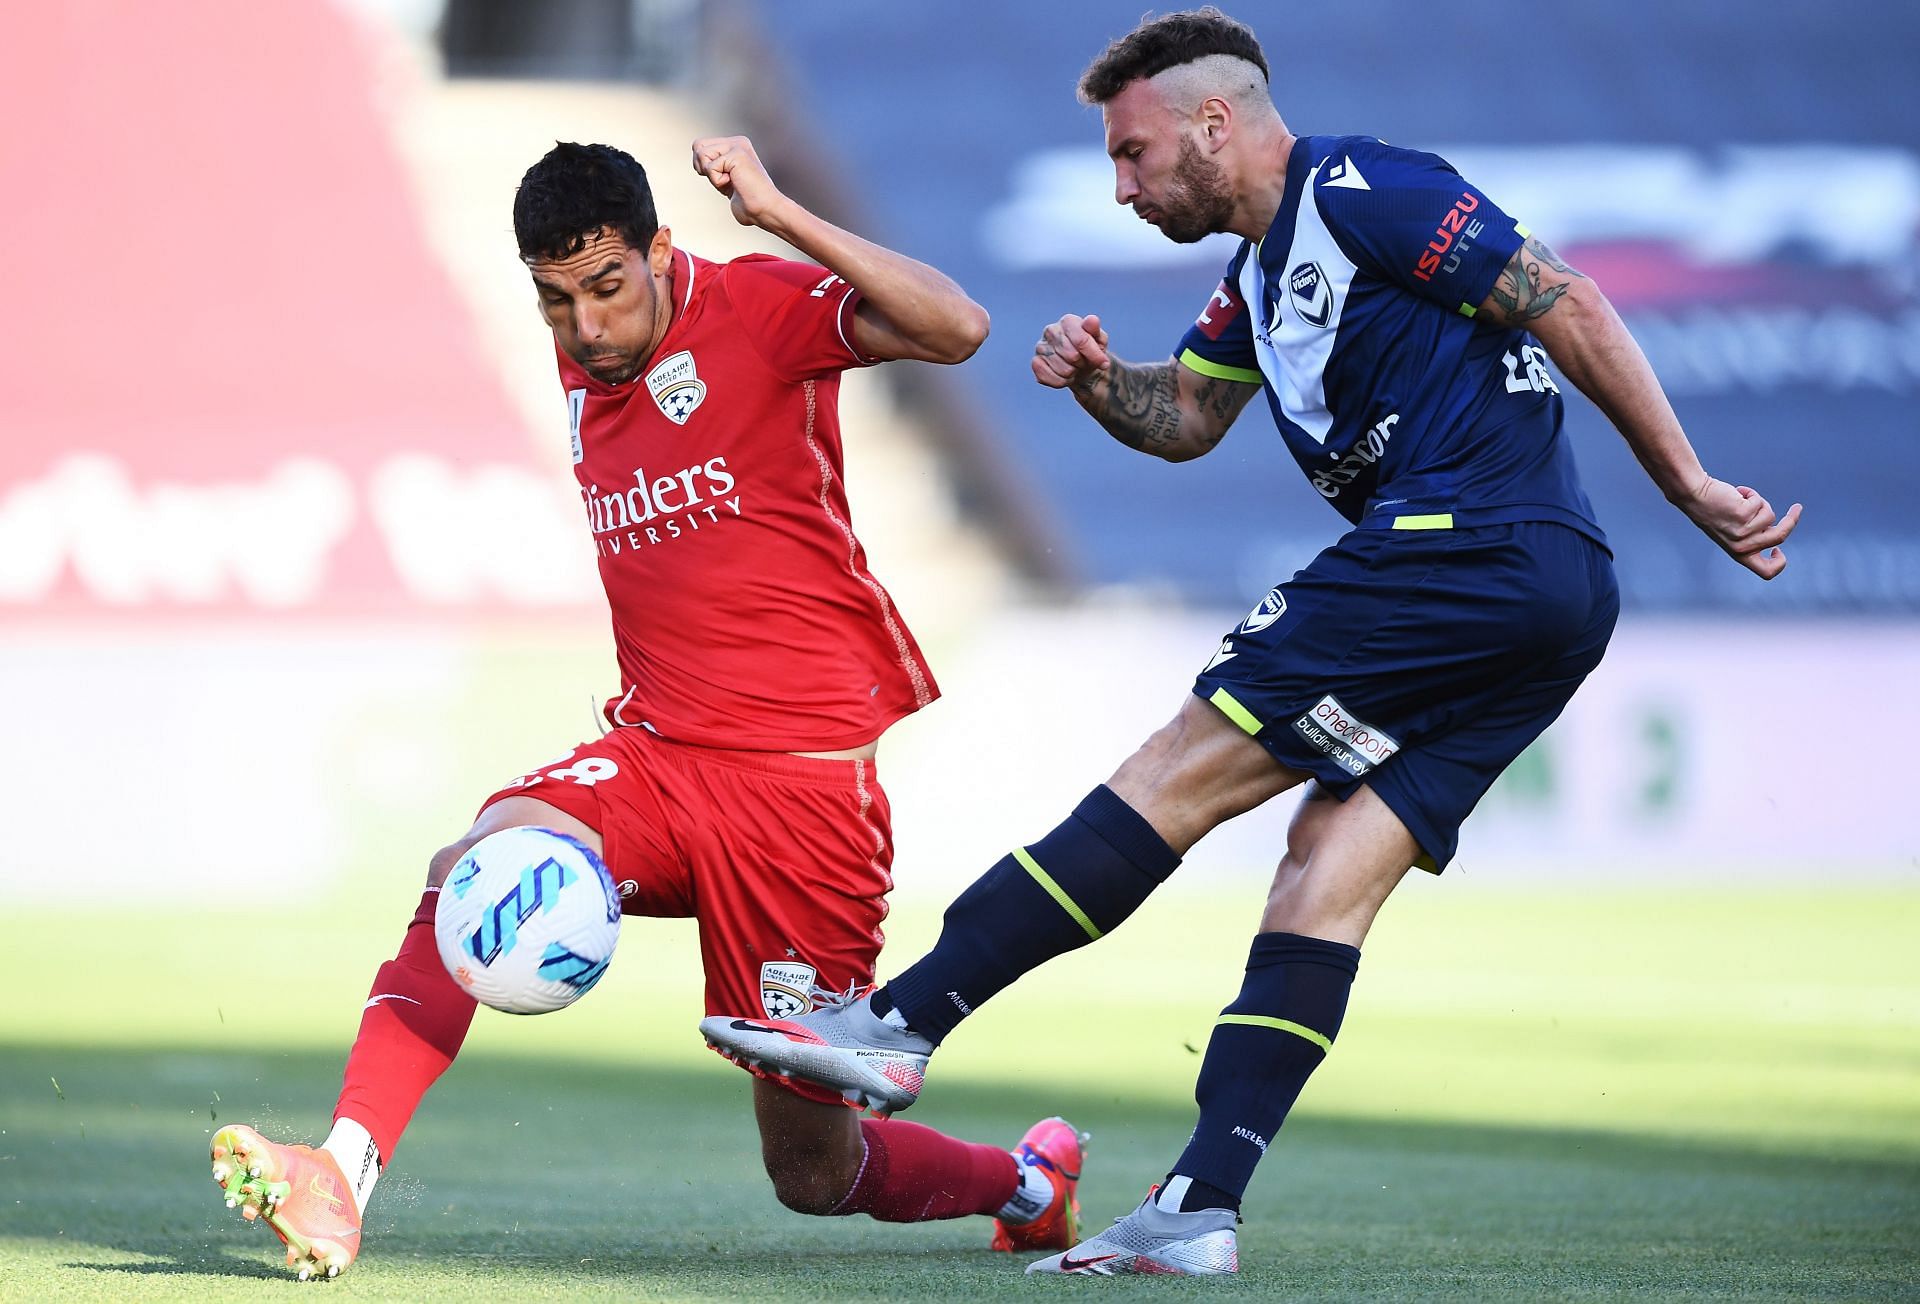 Adelaide United take on Melbourne Victory this week